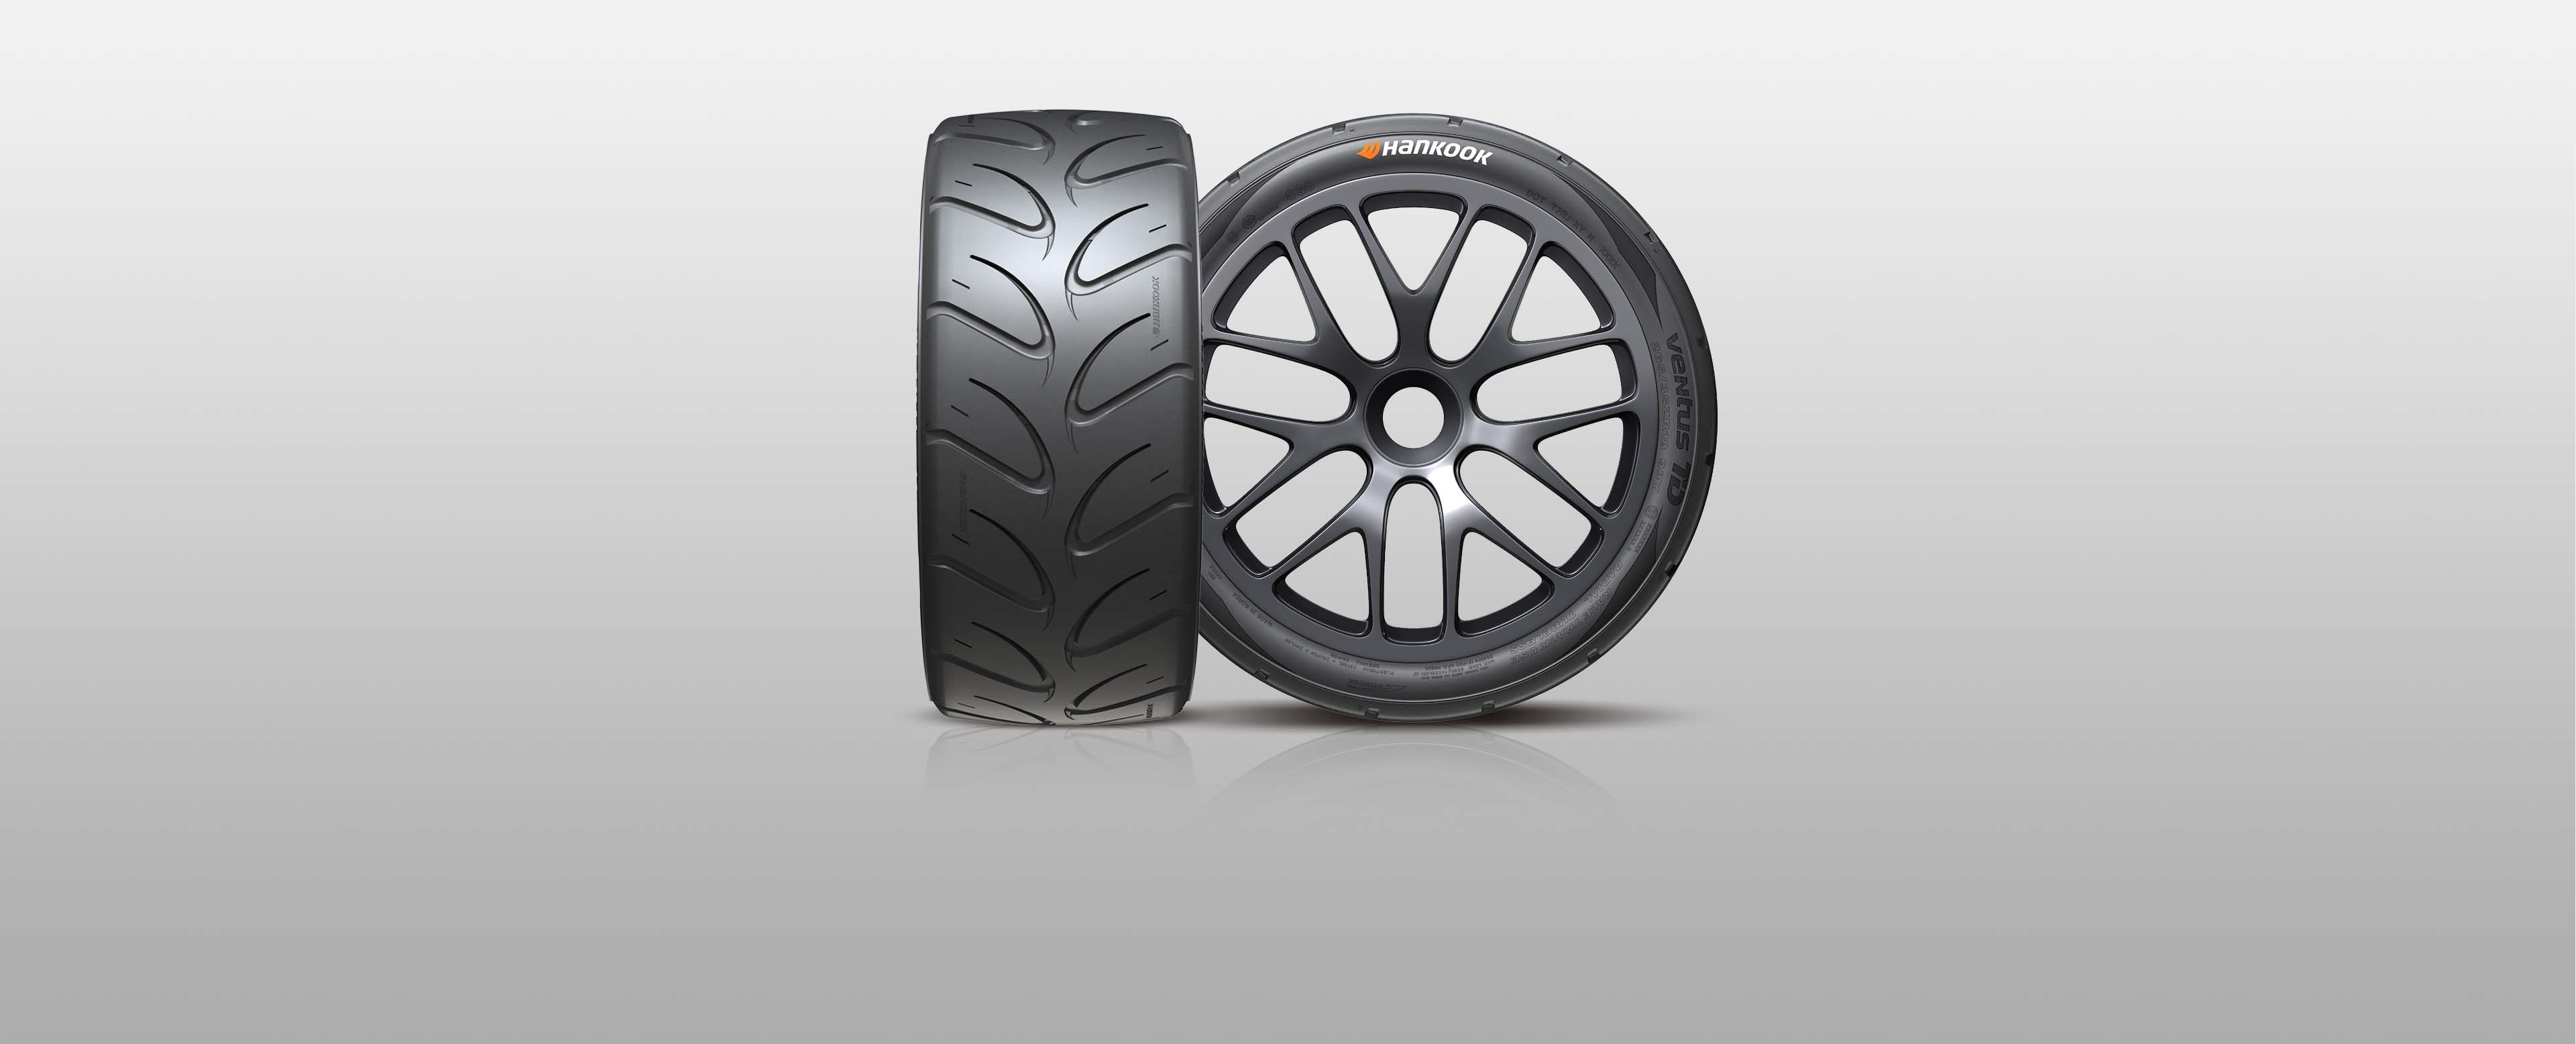 Hankook Tire & Technology-Tires-Ventus-Z221-Offers optimal potential on the circuit and ordinary roads